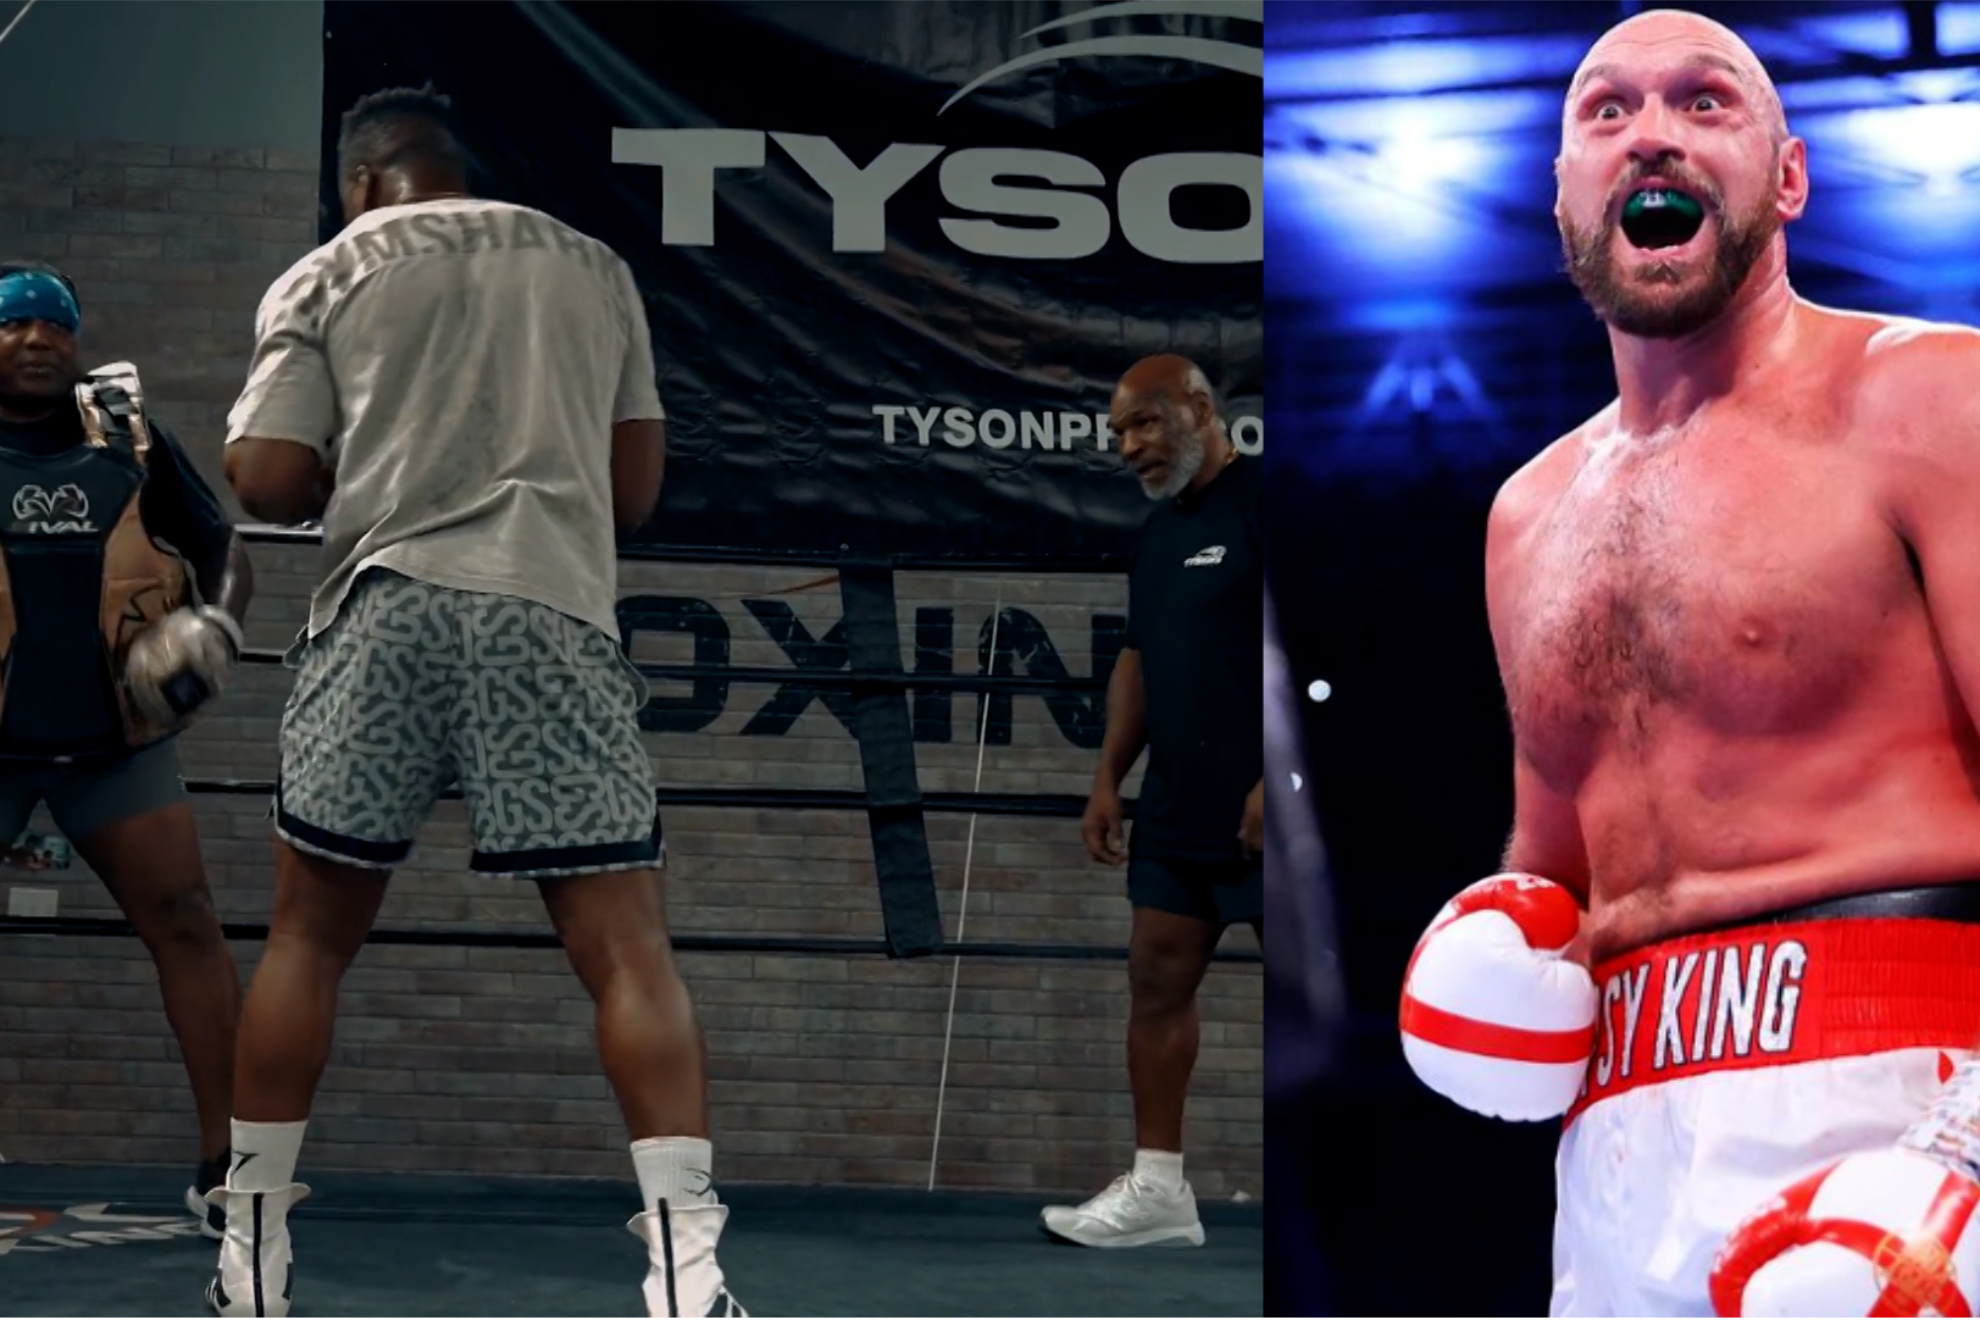 Mike Tyson and Francis Ngannou start verbal war with Tyson Fury ahead of highly anticipated October fight